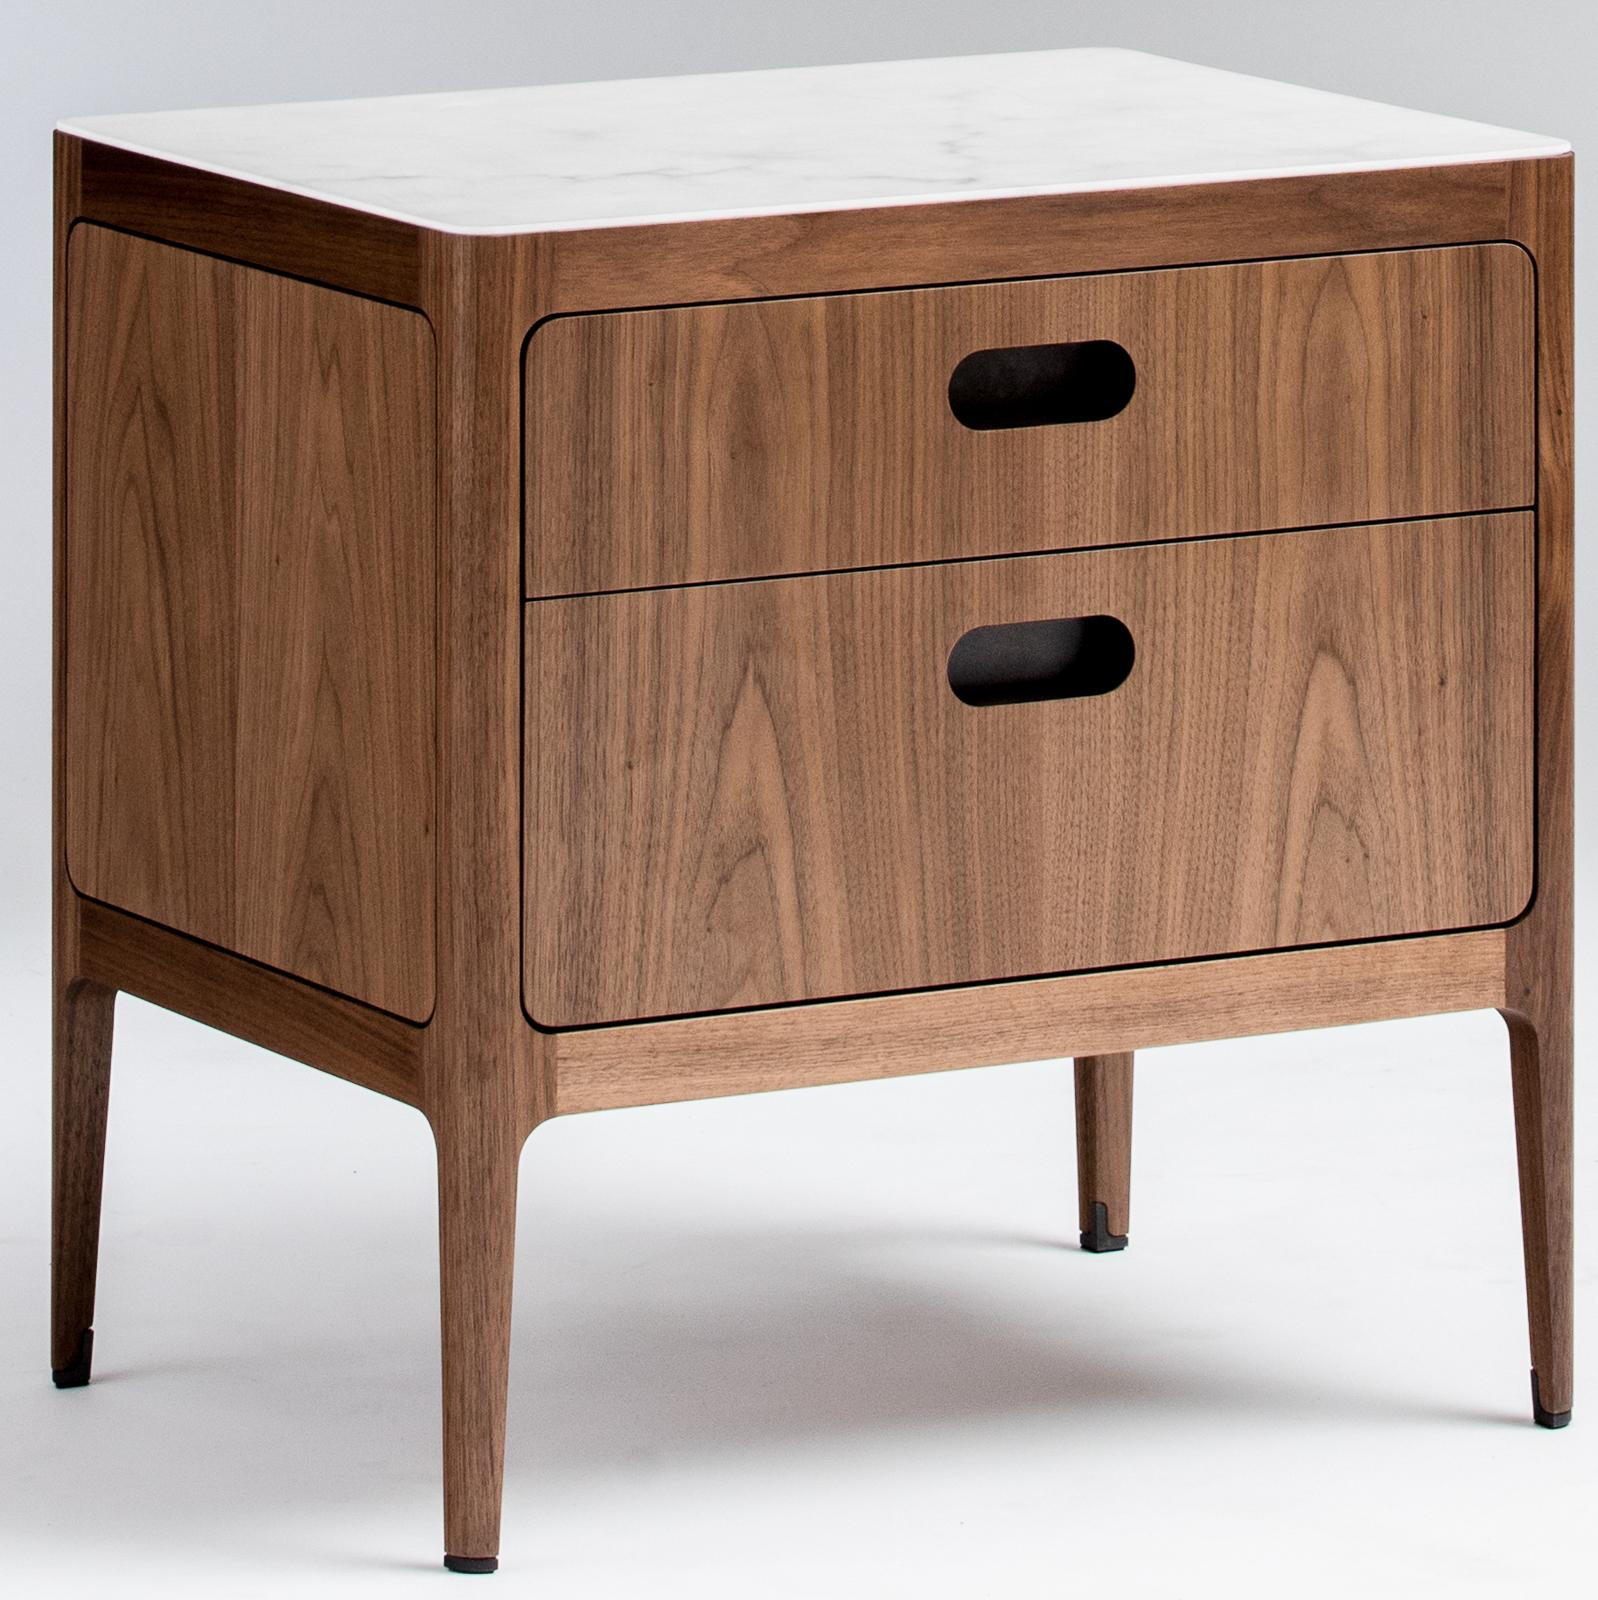 This walnut side table or nightstand designed and fabricated by Munson Furniture draws inspiration from mid-century designs and fits beautifully with both traditional and contemporary interiors. Using our Radius design tools, we started with our